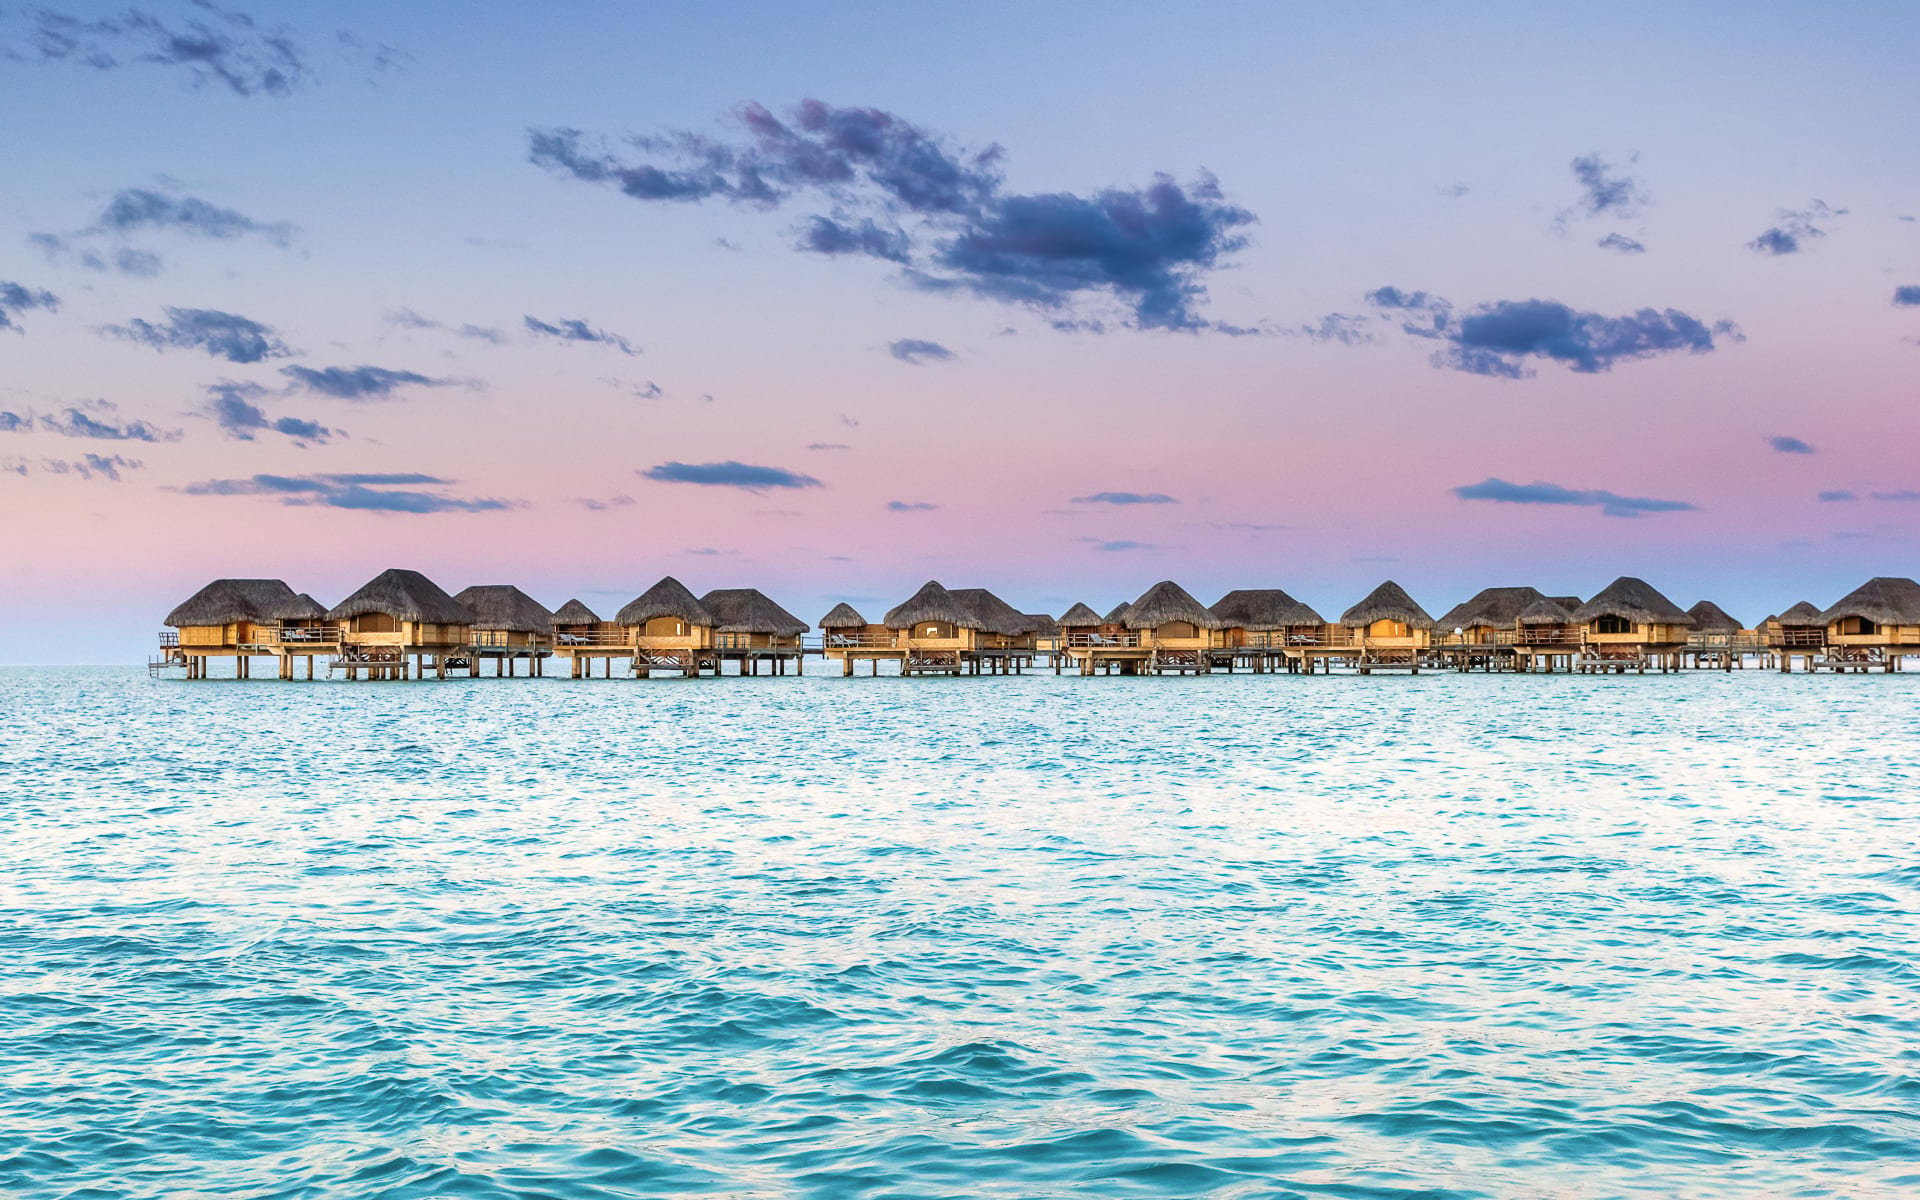 There is a row of overwater villas backed by a purple-blue sunset. 